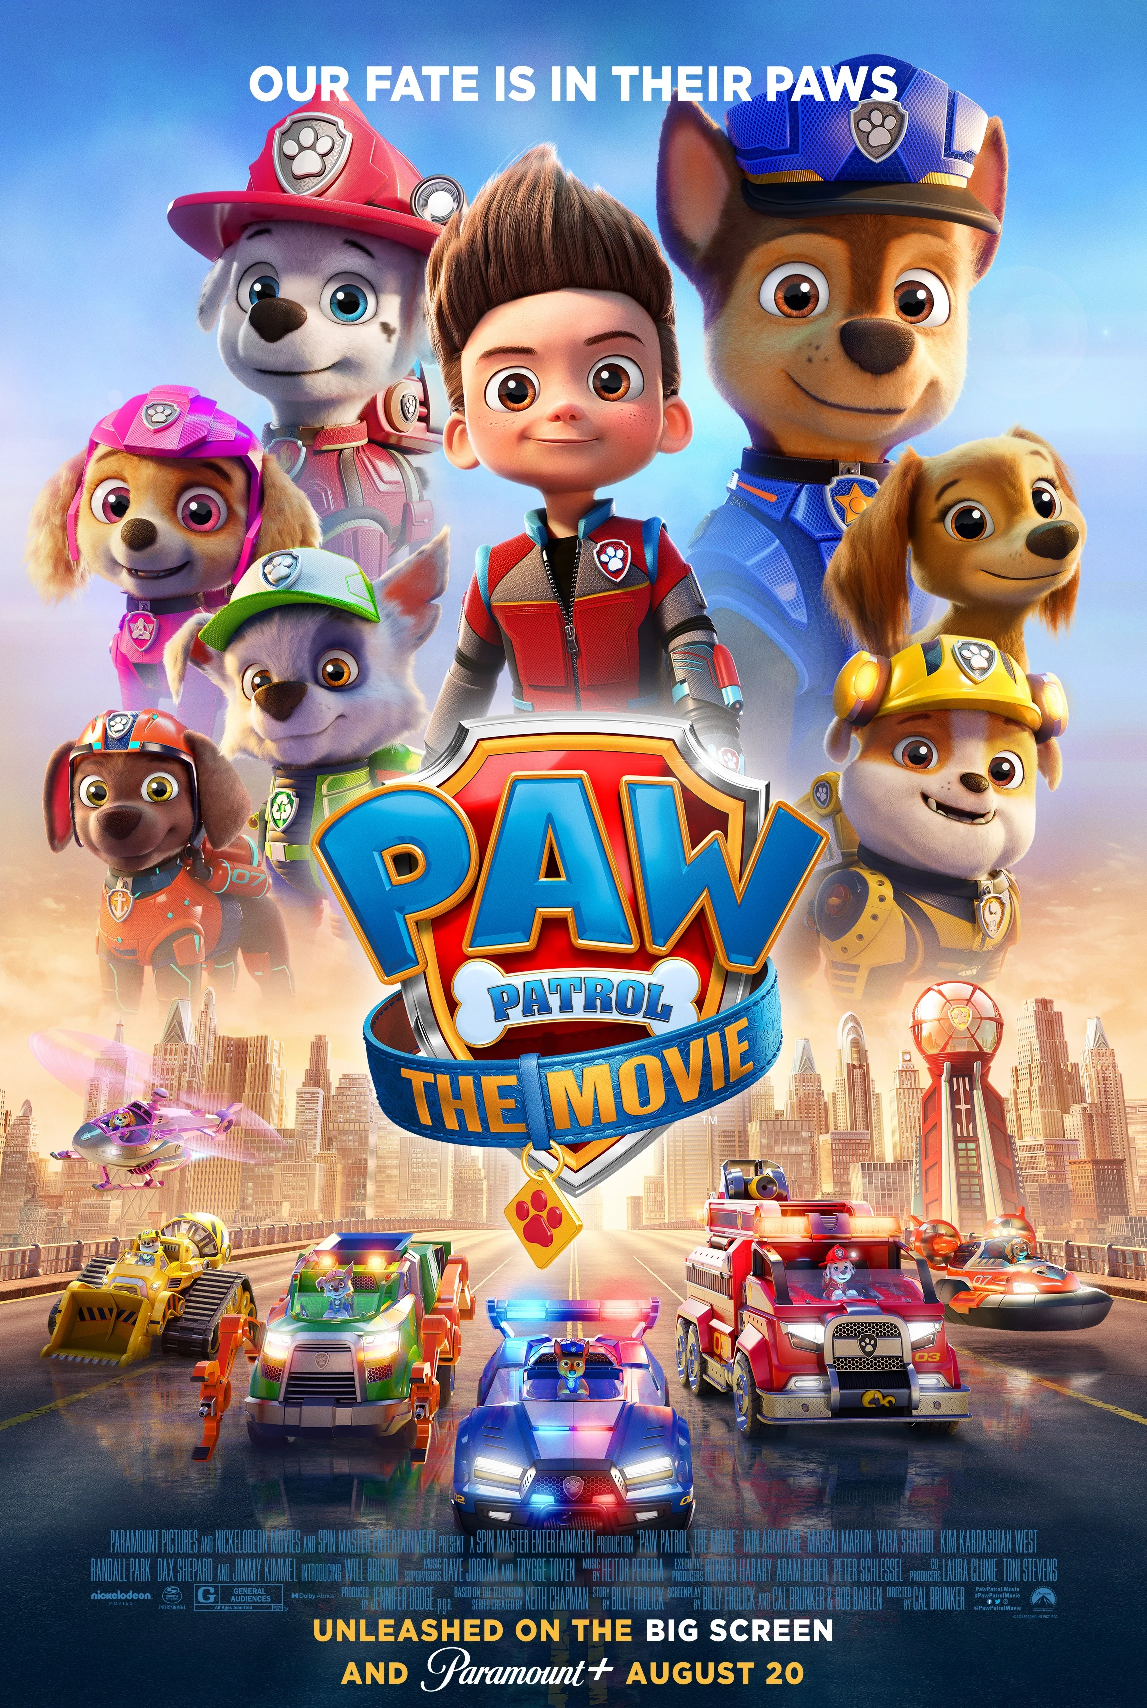 https://static.wikia.nocookie.net/viacom4633/images/c/c2/PAW_Patrol_The_Movie_%28film%29.png/revision/latest?cb=20210813210243